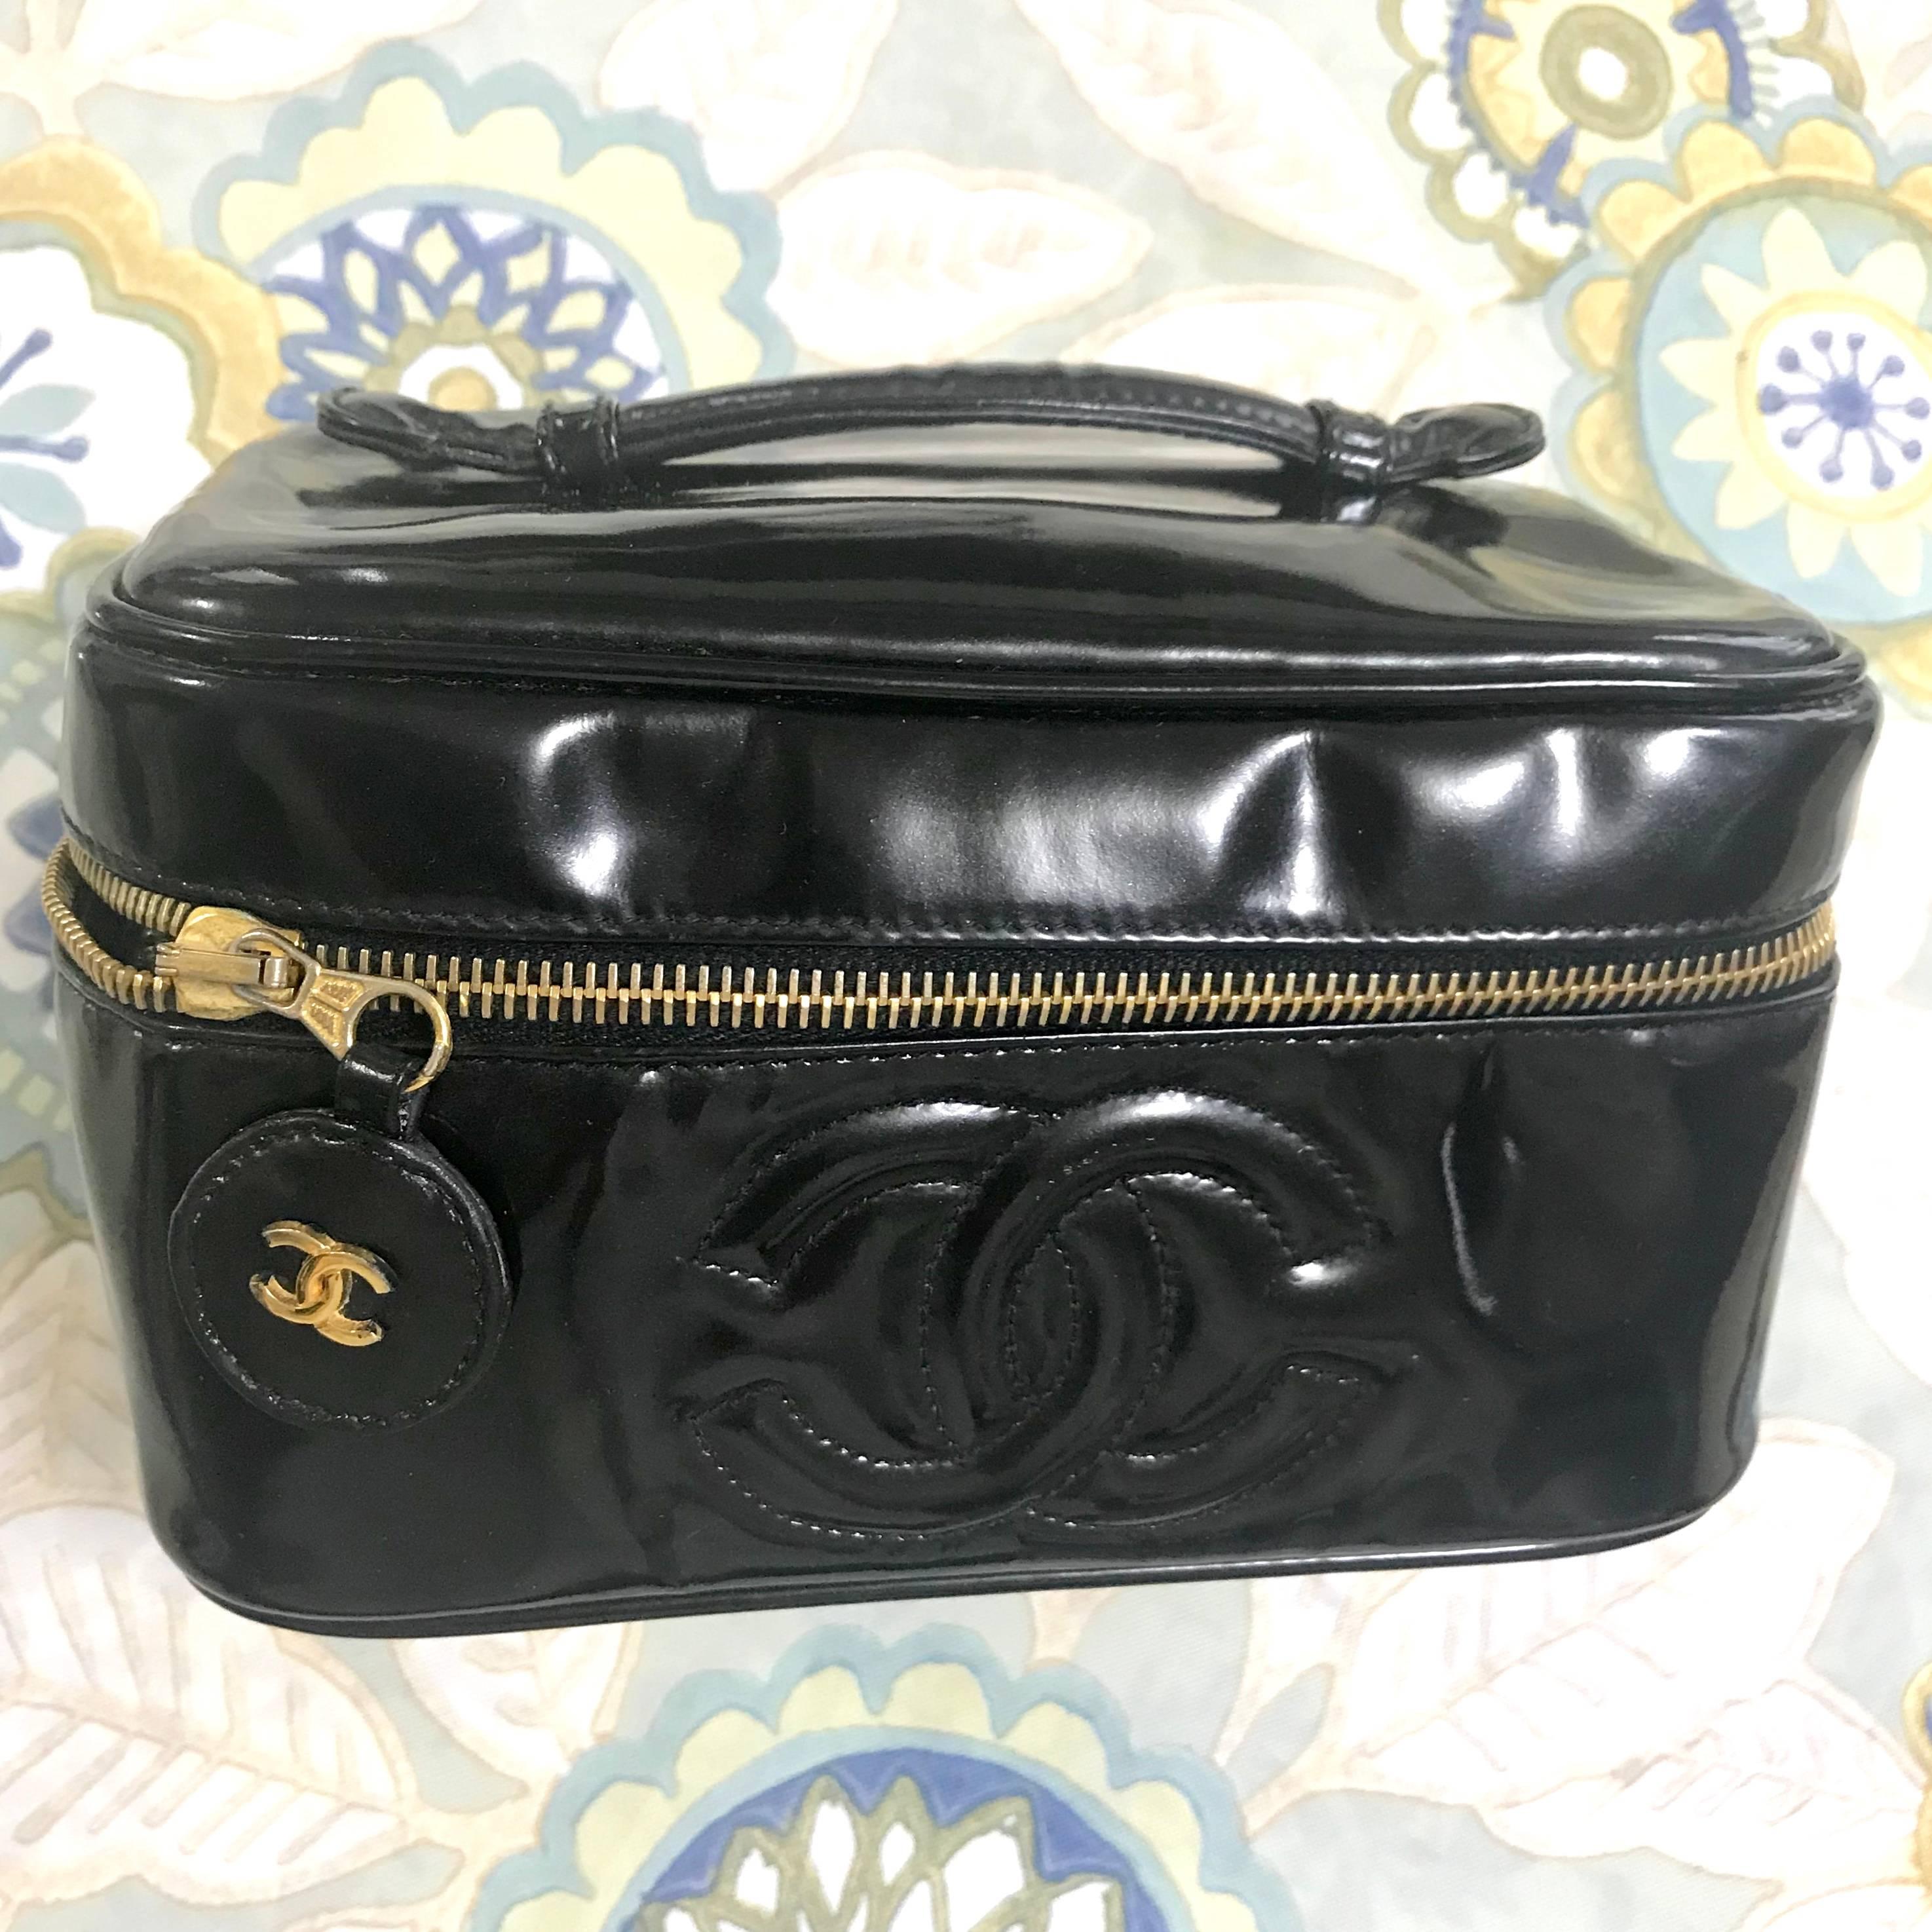 1990s. Vintage CHANEL patent enamel cosmetic and toiletry black pouch purse with CC charm. Very chic vanity purse for many use. 

This is a 90's vintage CHANEL classic black cosmetic pouch purse in black patent enamel.
Featuring a stitched CC mark